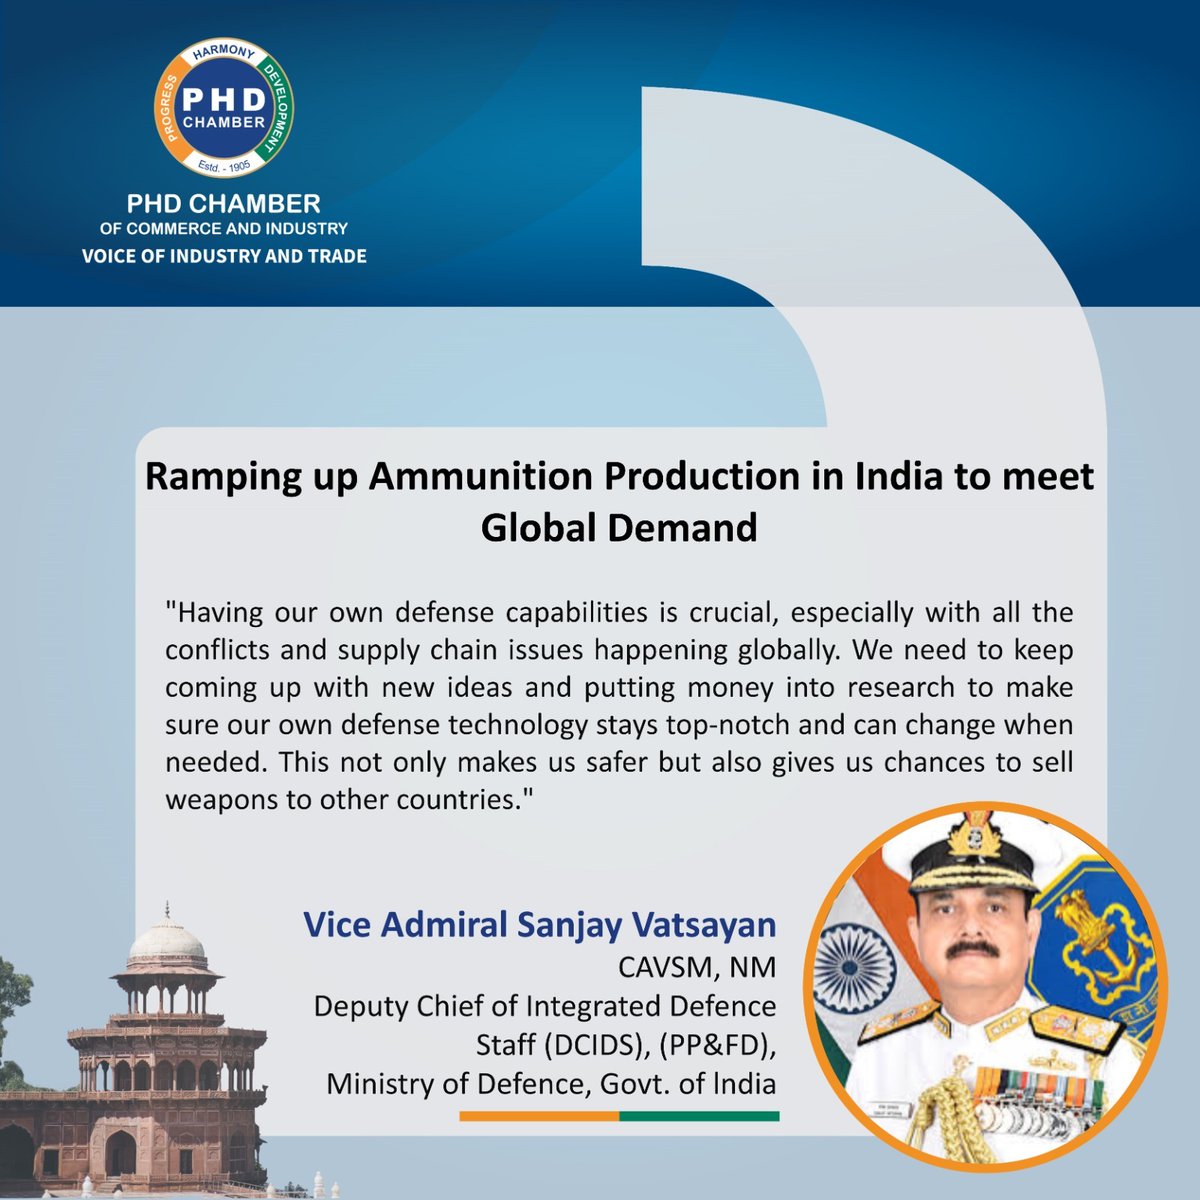 Ramping up Ammunition Production in India to meet Global Demand: Dive into the wisdom shared by our esteemed speakers during our recent event on ammunition production.   

#phdcci #AmmunitionProduction #GlobalDemand #Innovation #Technology #DefenseIndustry #StrategicPartnerships